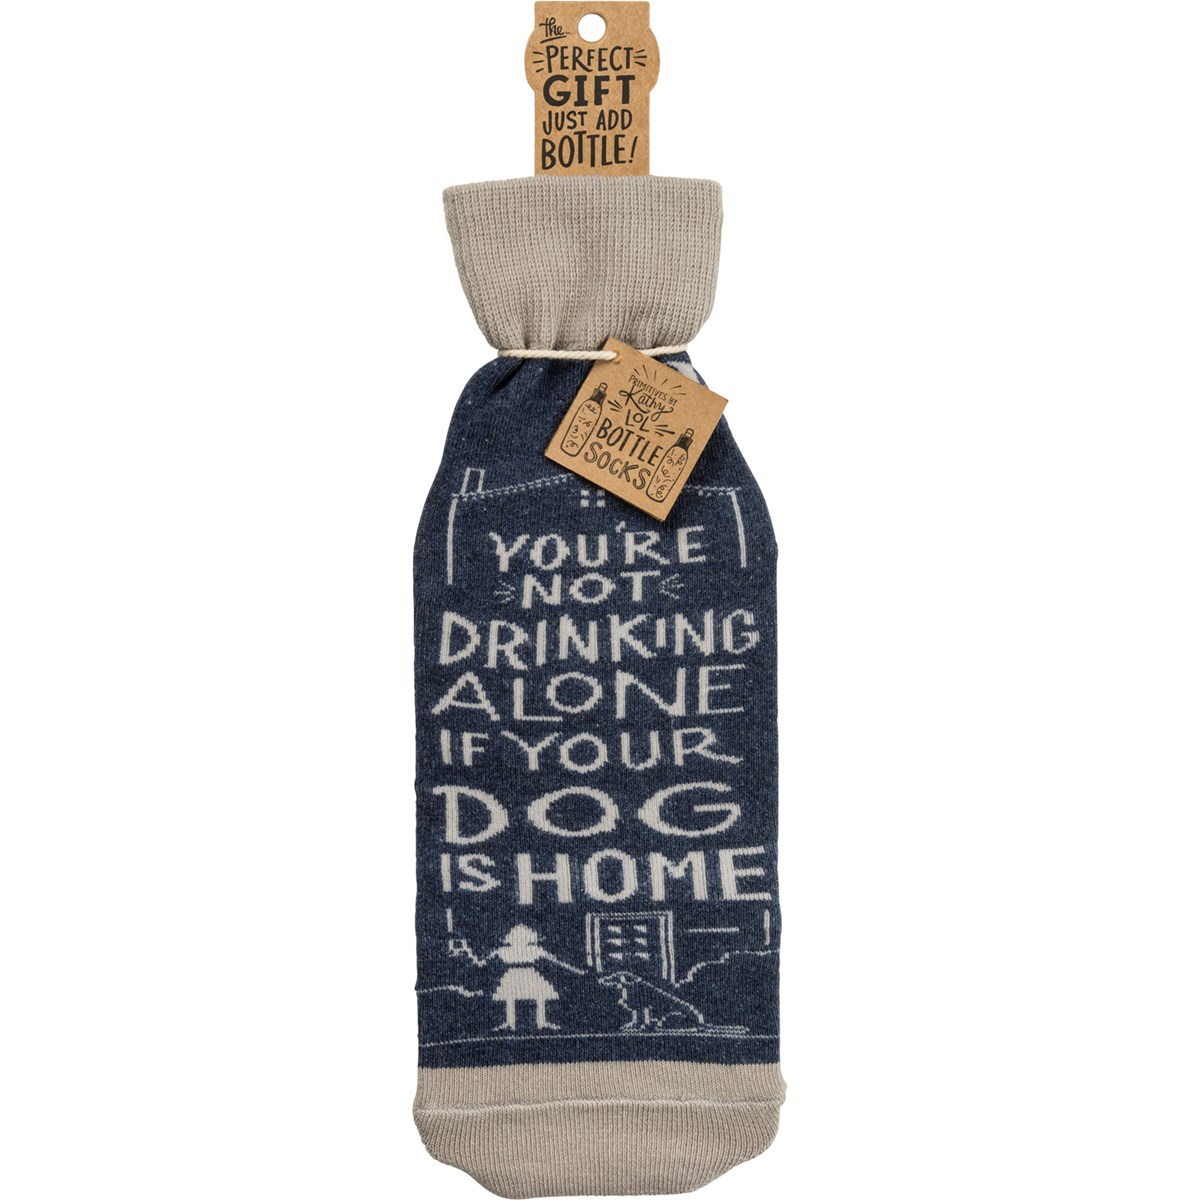 Bottle Sock - Not Drinking Alone If Dog Home - 3.50" x 11.25", Fits 750mL to 1.5L bottles - Cotton, Nylon, Spandex